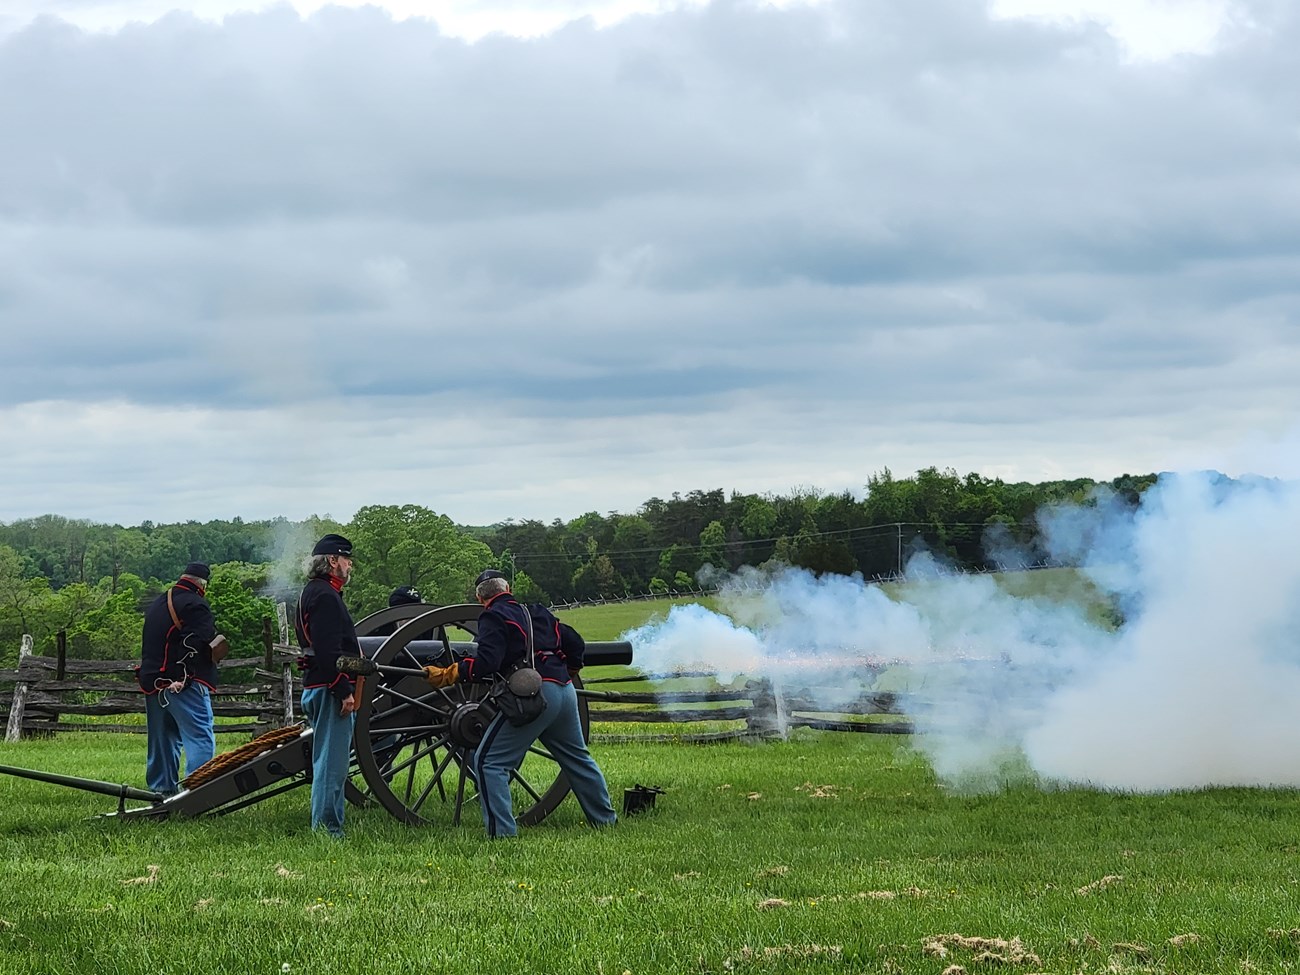 The Bull Run Legion fire's the park's cannon wearing Federal uniforms in blue with red trim. Smoke and fire pour out of the barrel against a green, luch backdrop.